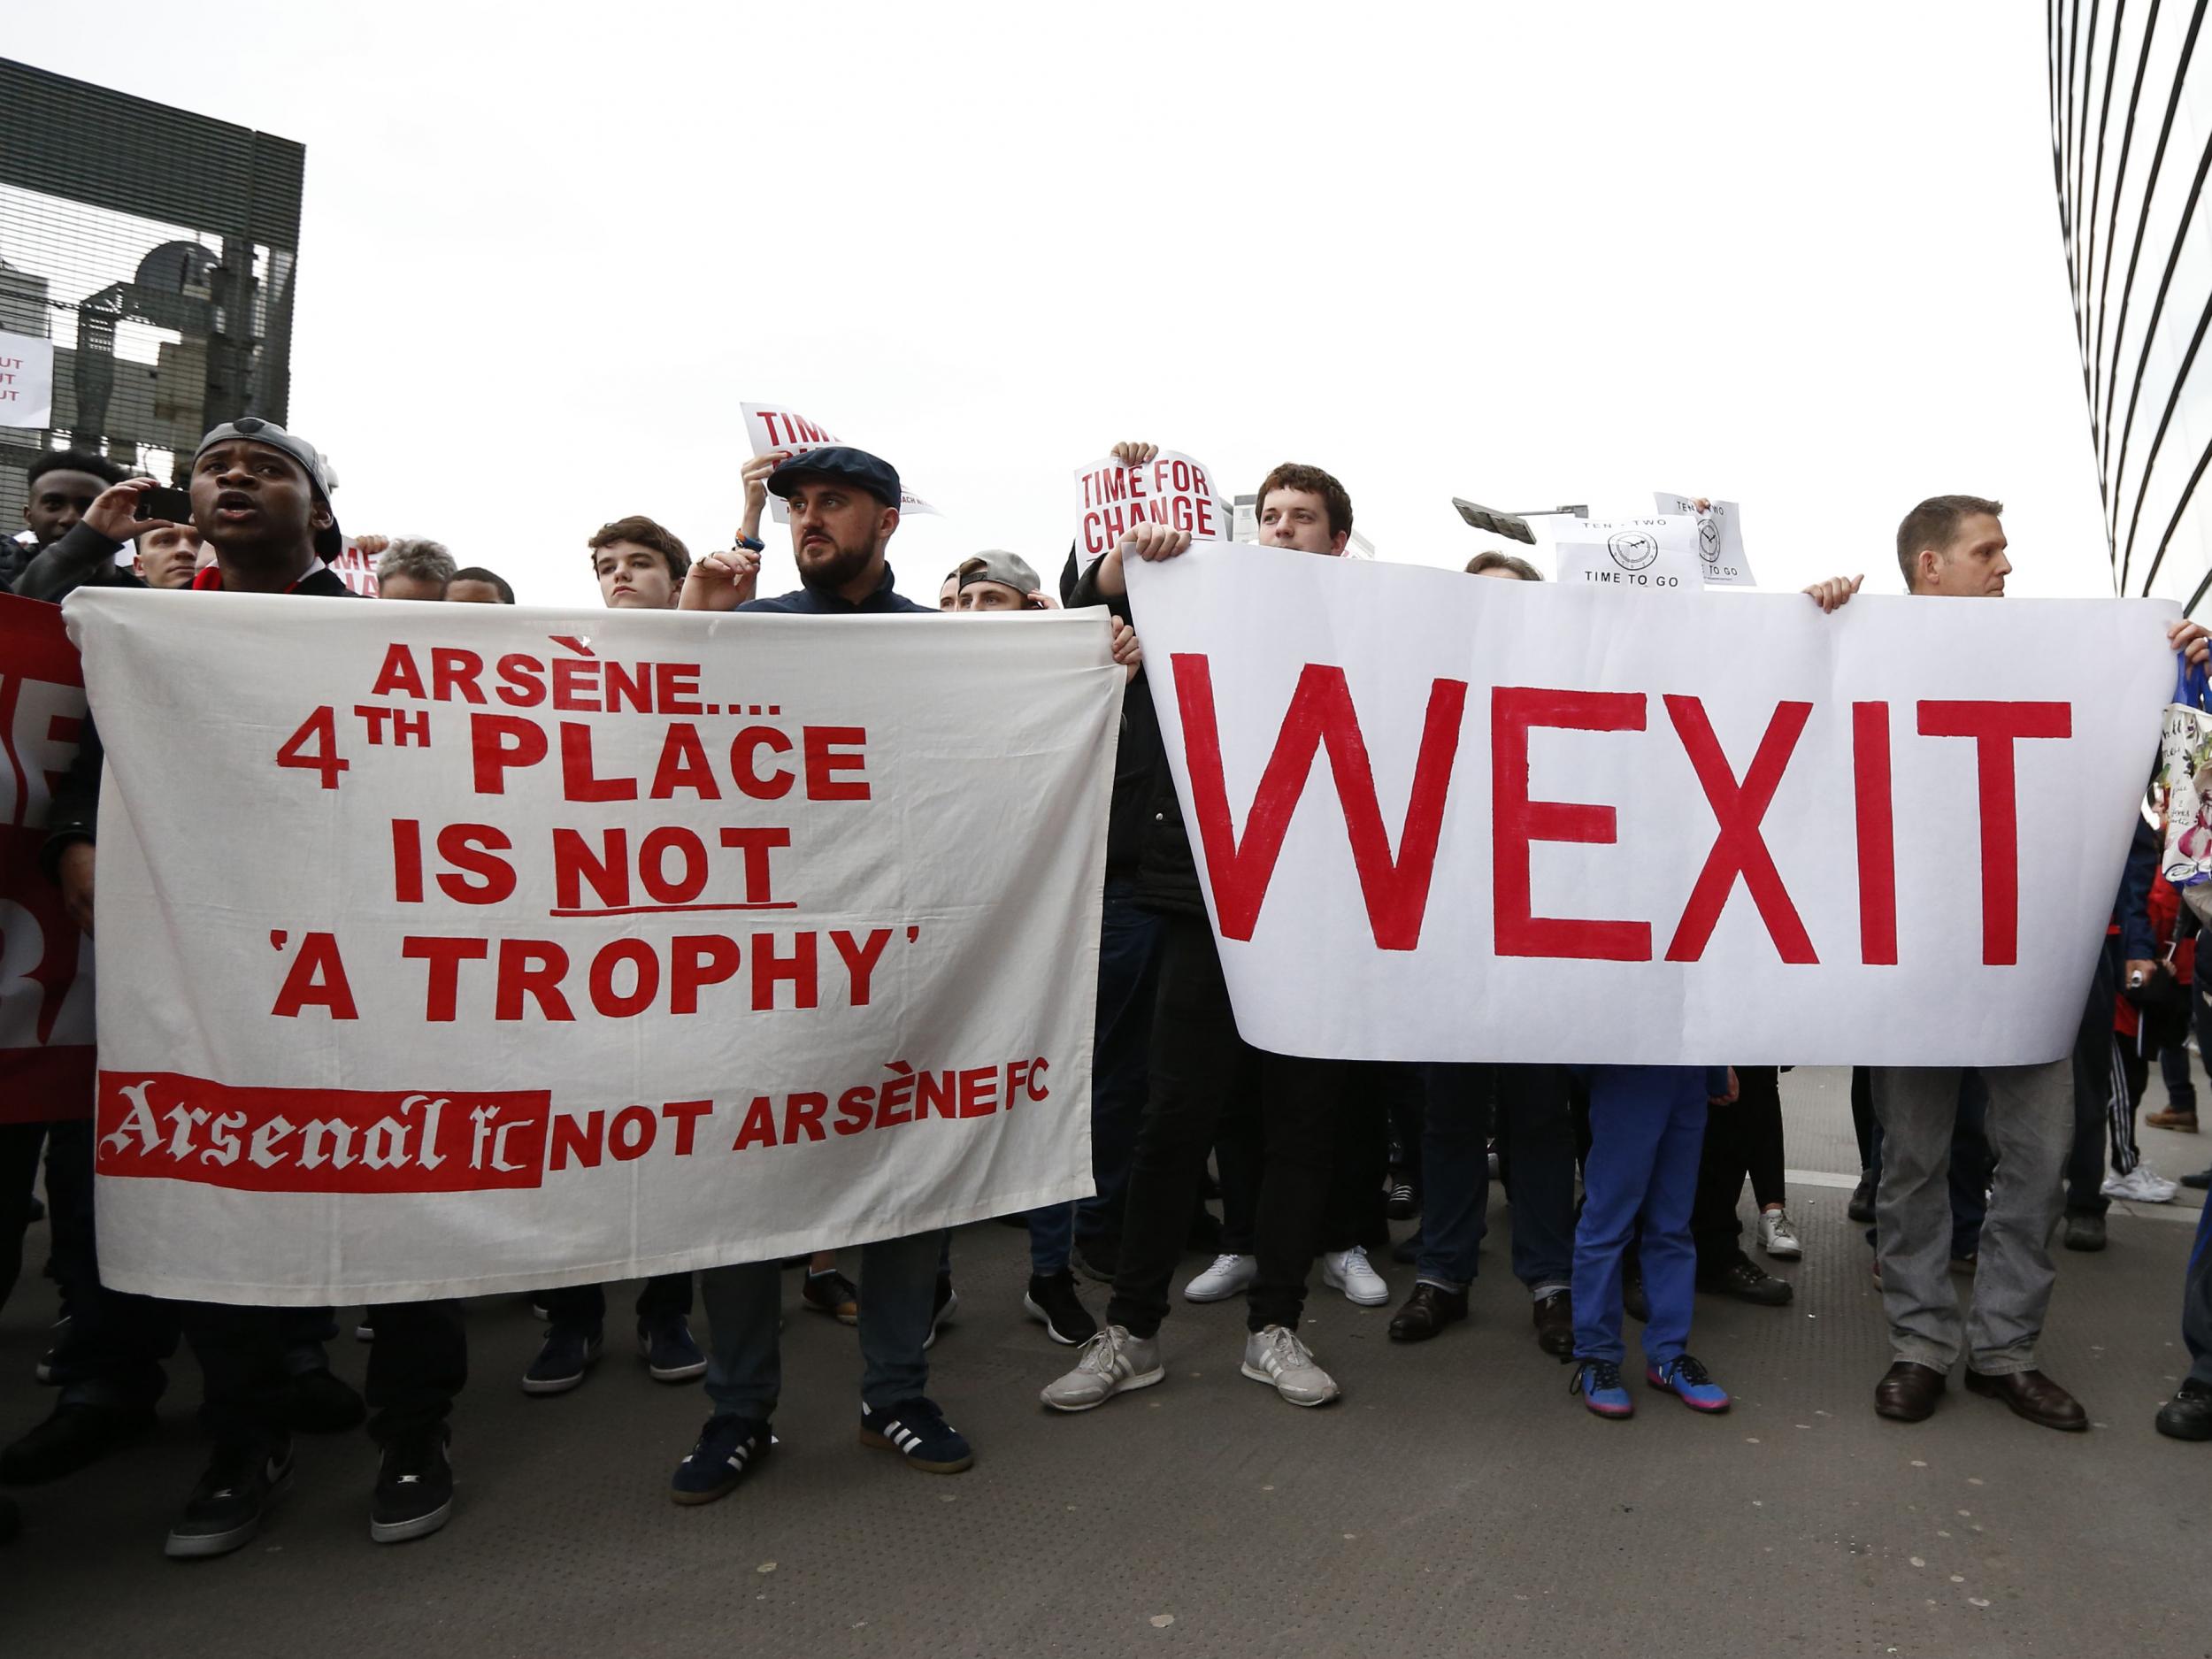 Another planned protest against Arsene Wenger has been cancelled